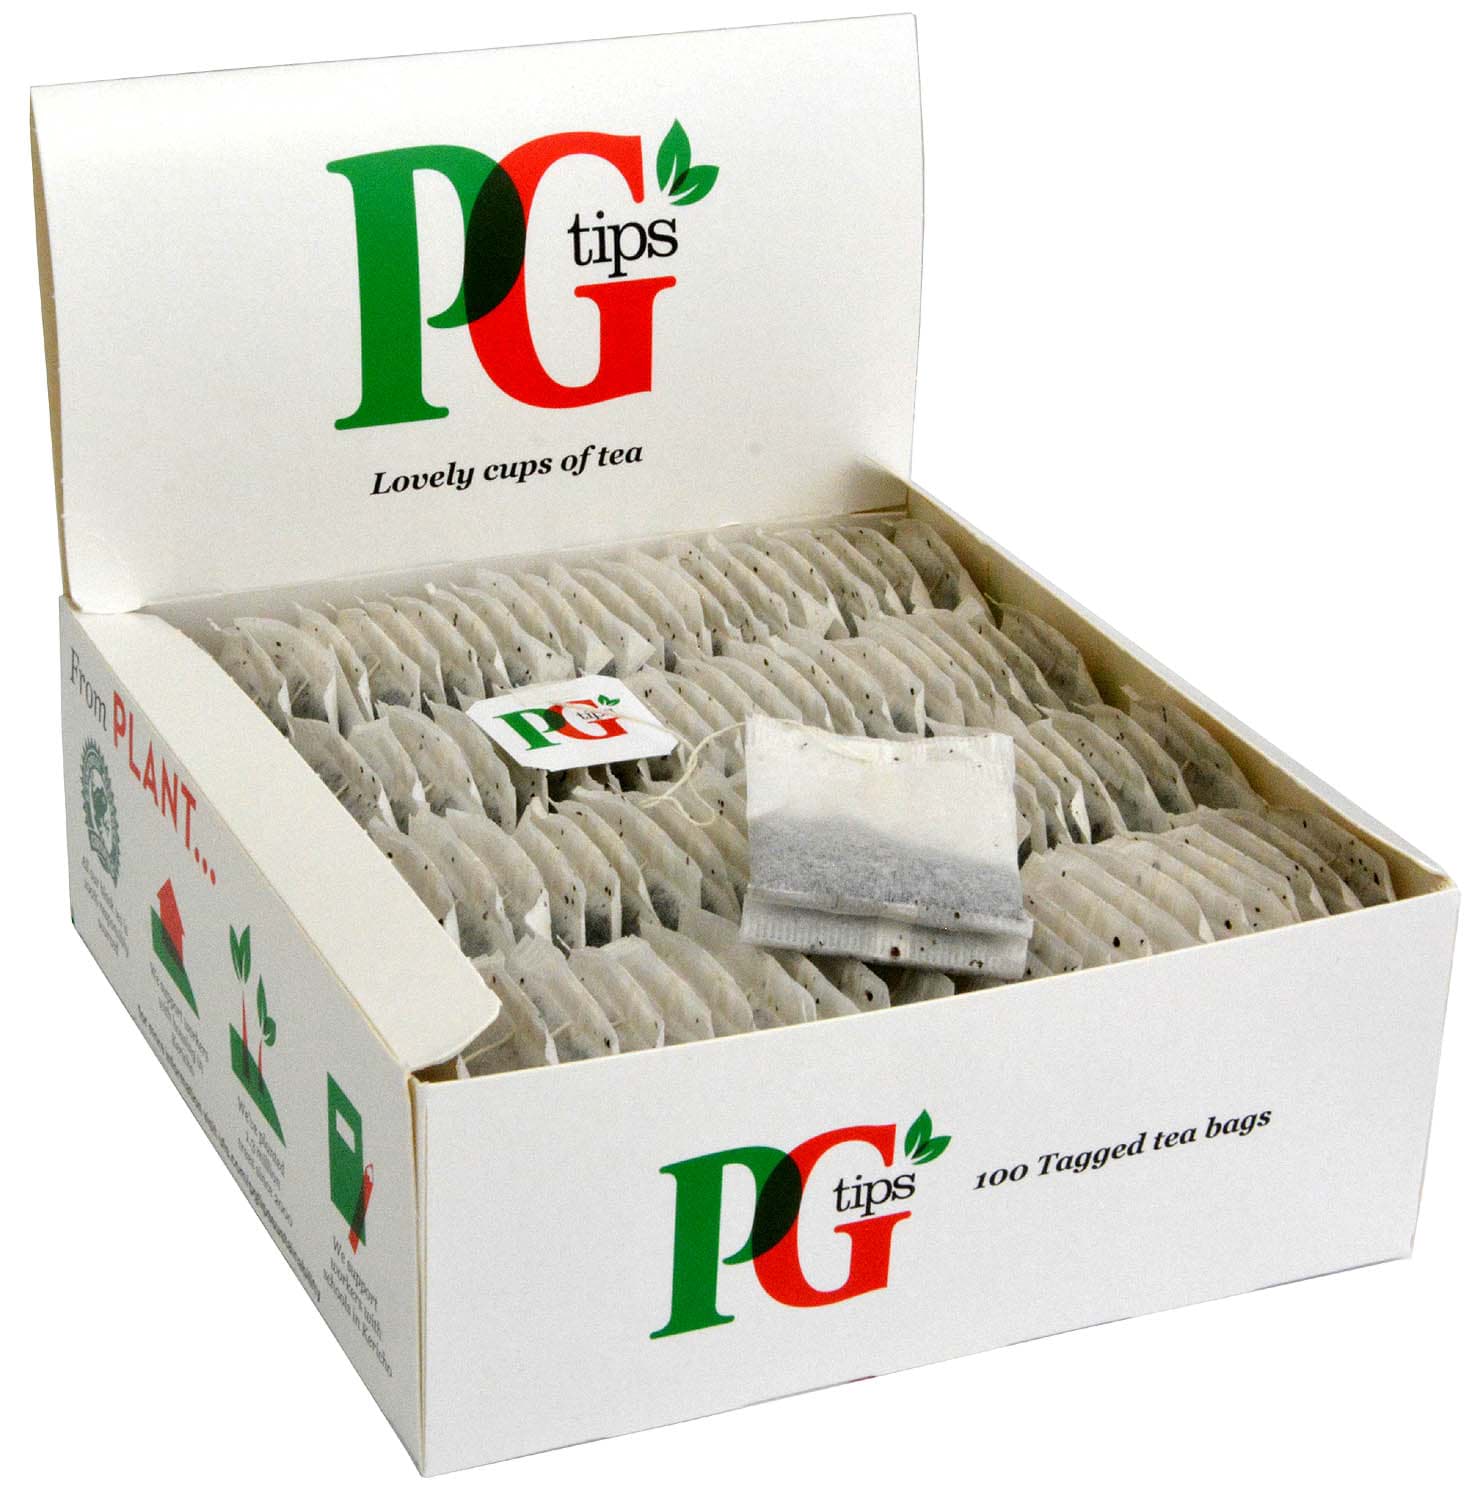 PG Tips One Cup Tea Bags (1x1100)